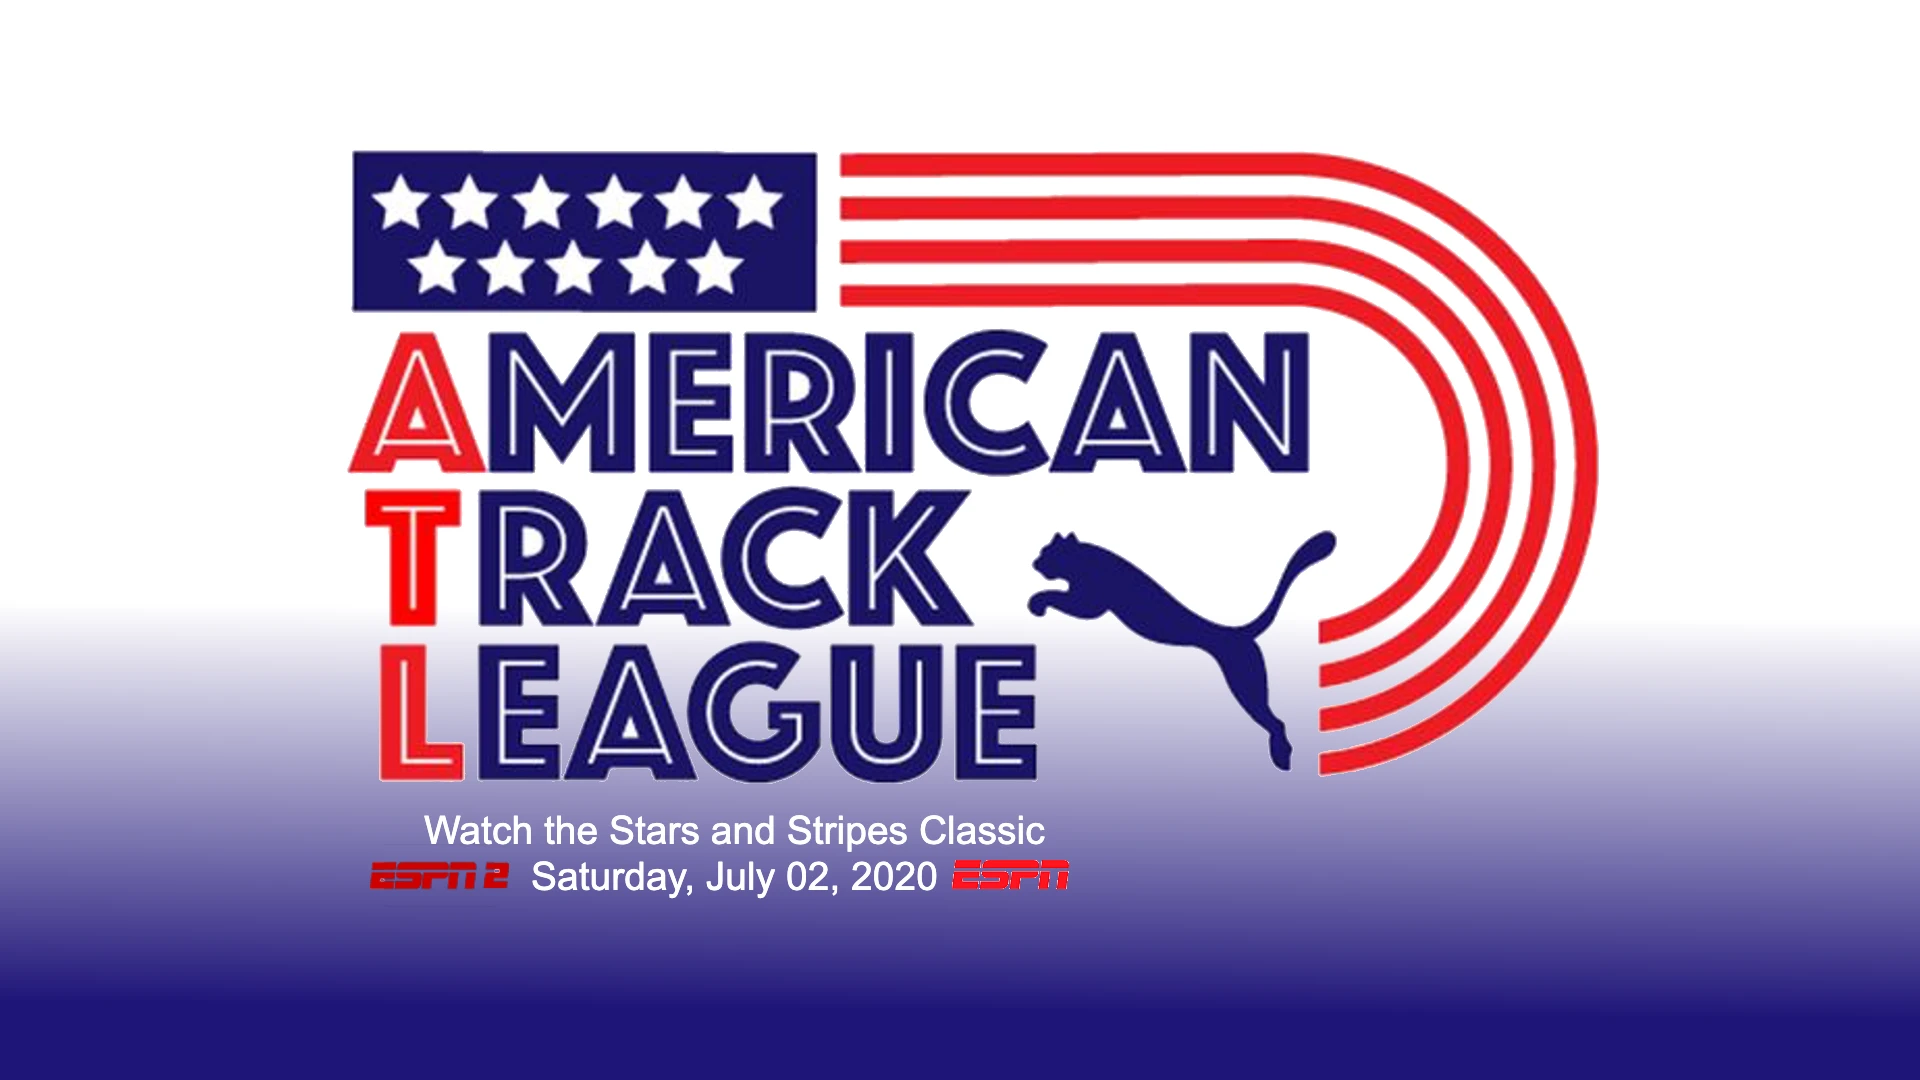 How to watch the Stars and Stripes Classic American Track League 2022